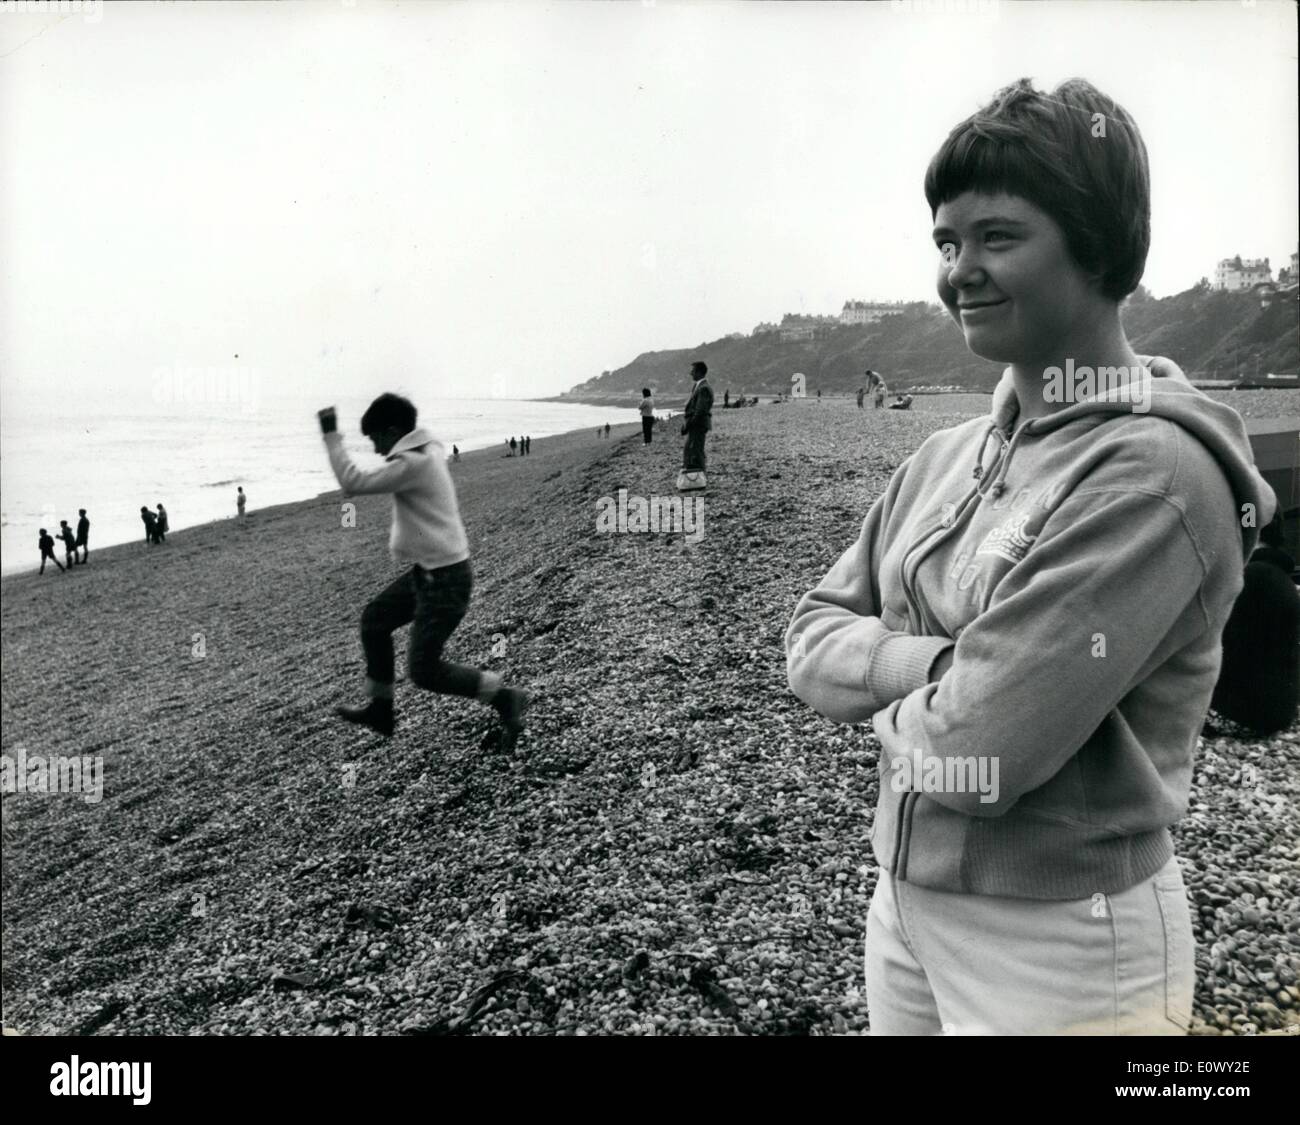 Aug. 08, 1964 - 14-Year-old Californian schoolgirl to attempt to swim the English channel: Yesterday's cold, grey English Channel failed to daunt 14-year-old Leonora Modell who has come from sunny California to swim it. She was picked as a ''guinea pig'' for a scientific experiment designed to build stamina and energy. Mr. Paul Herron, her coach, who has swum the Channel both ways, said she was picked for the test because she was the poorest swimmer in her class, now she holds several swimming records Stock Photo